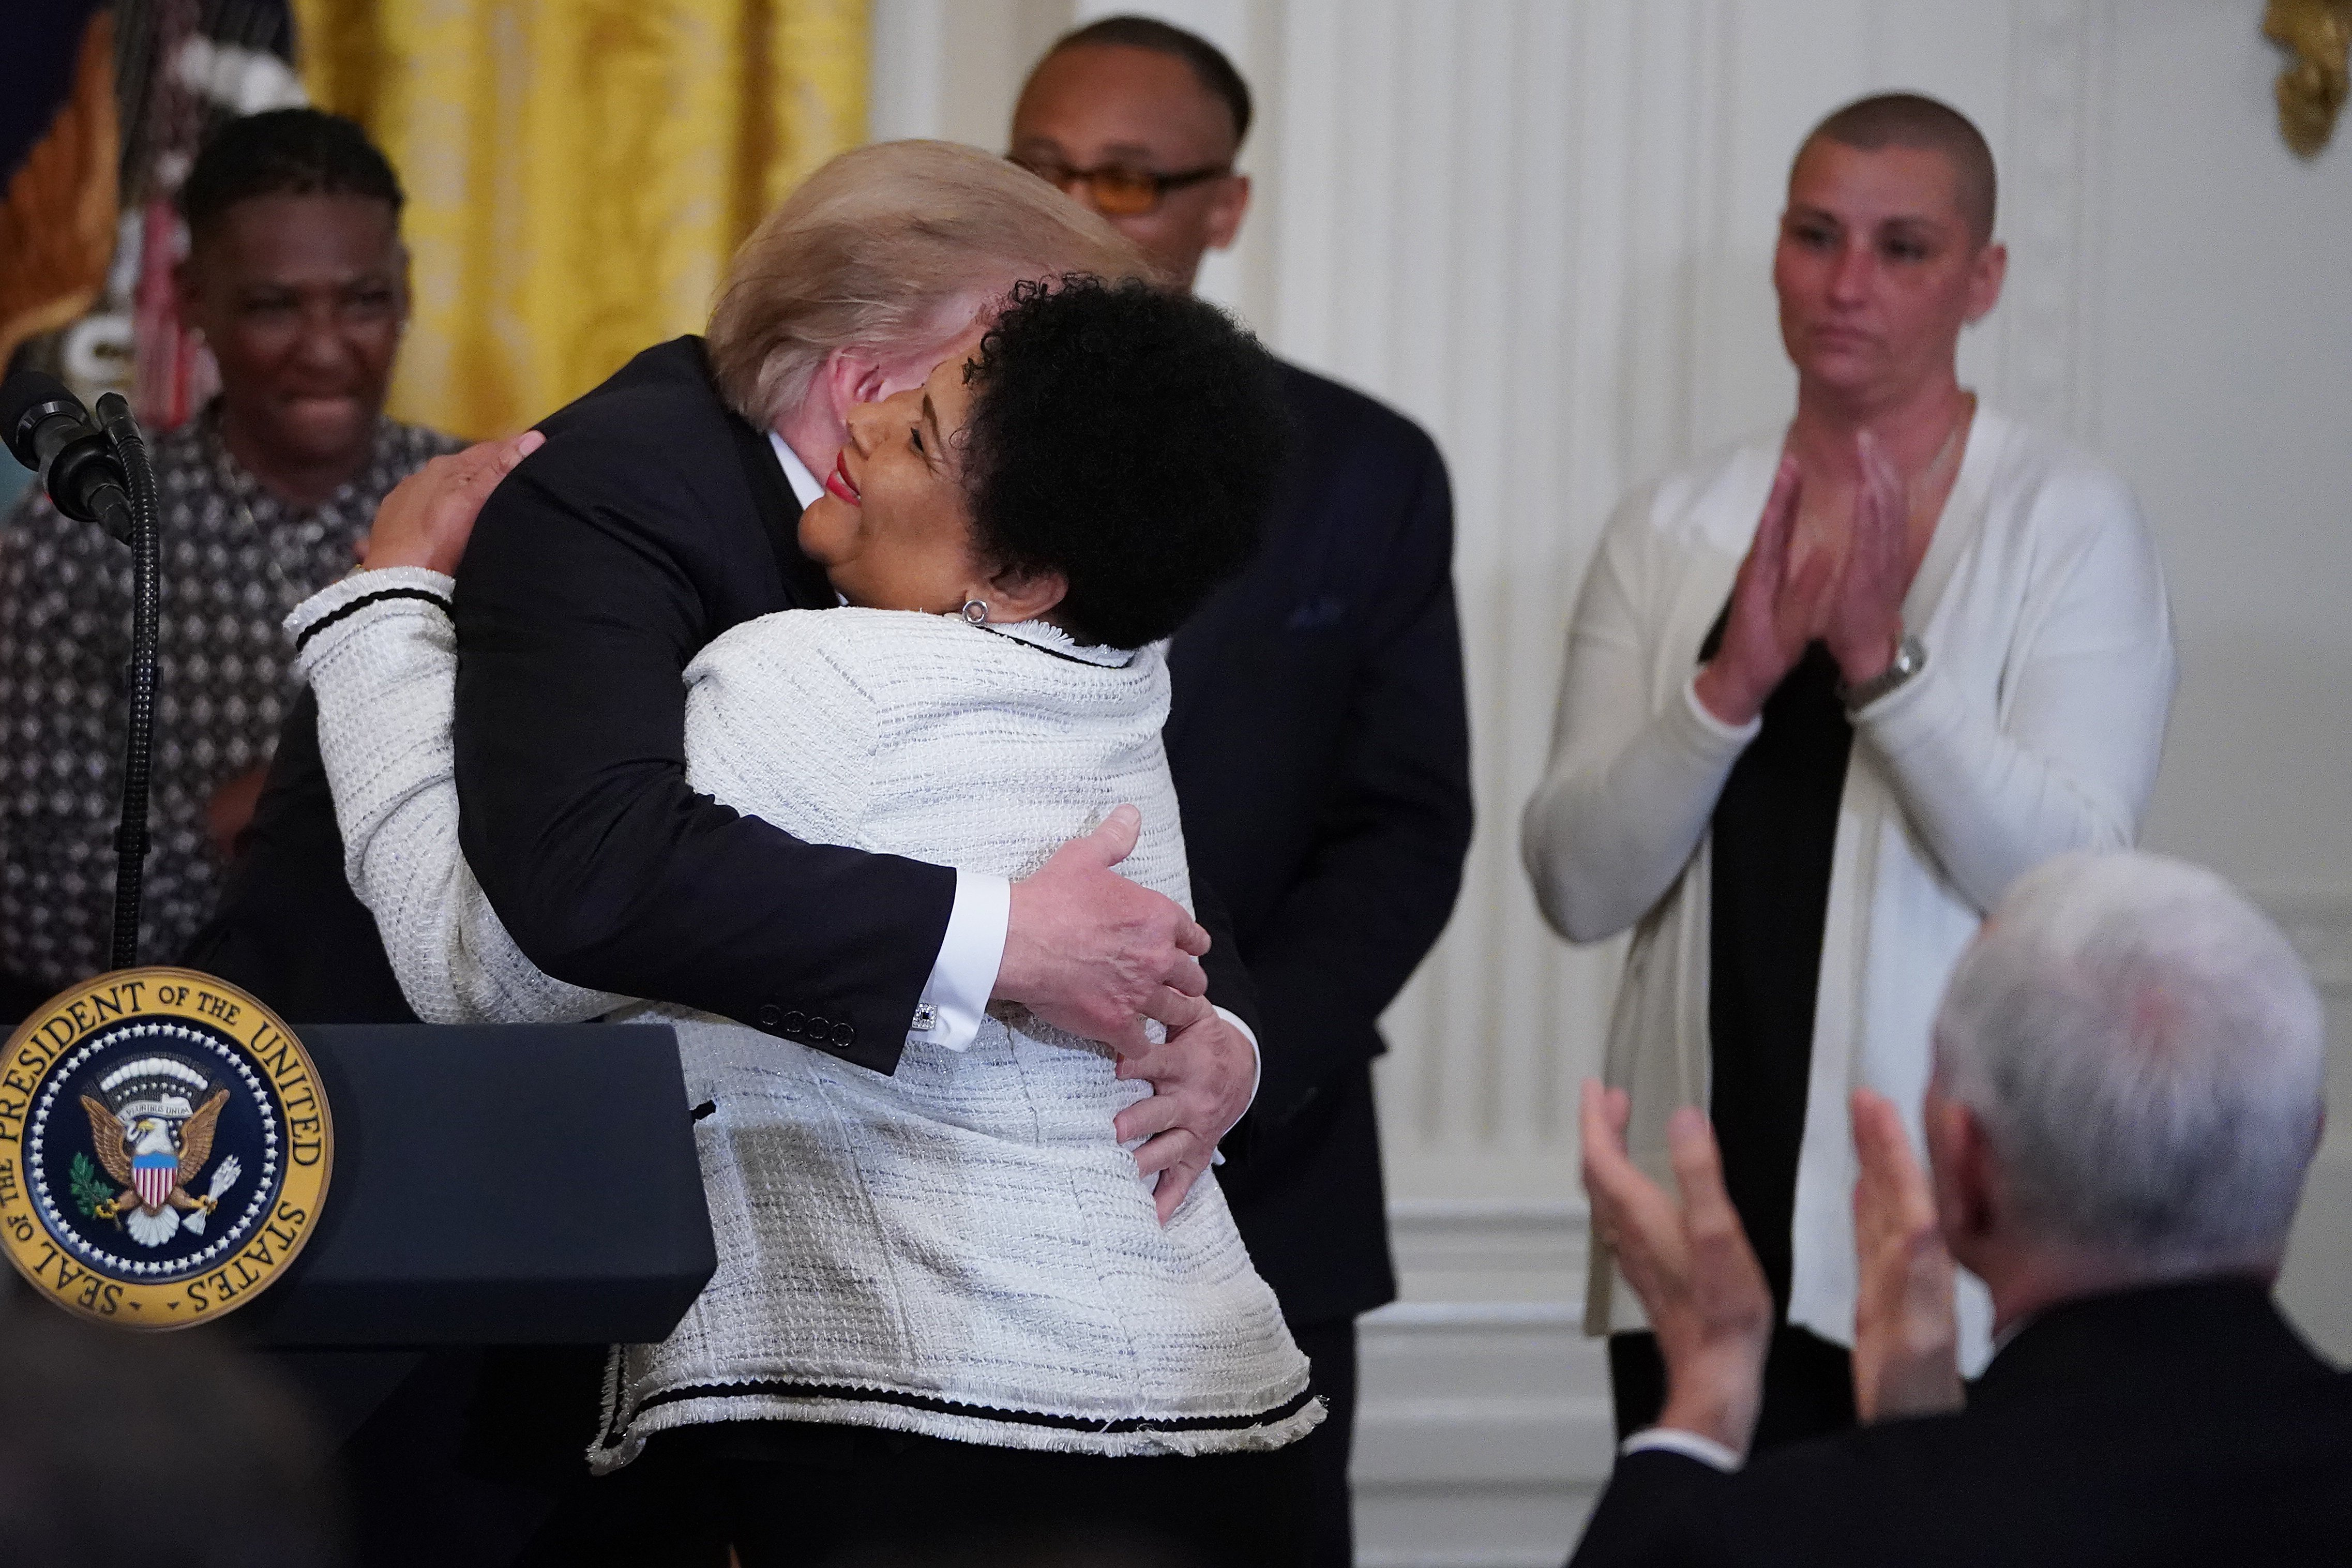 President Donald Trump and Alice Johnson at Prison Reform Summit and First Step Act celebration at the White House. | Photo: GettyImages